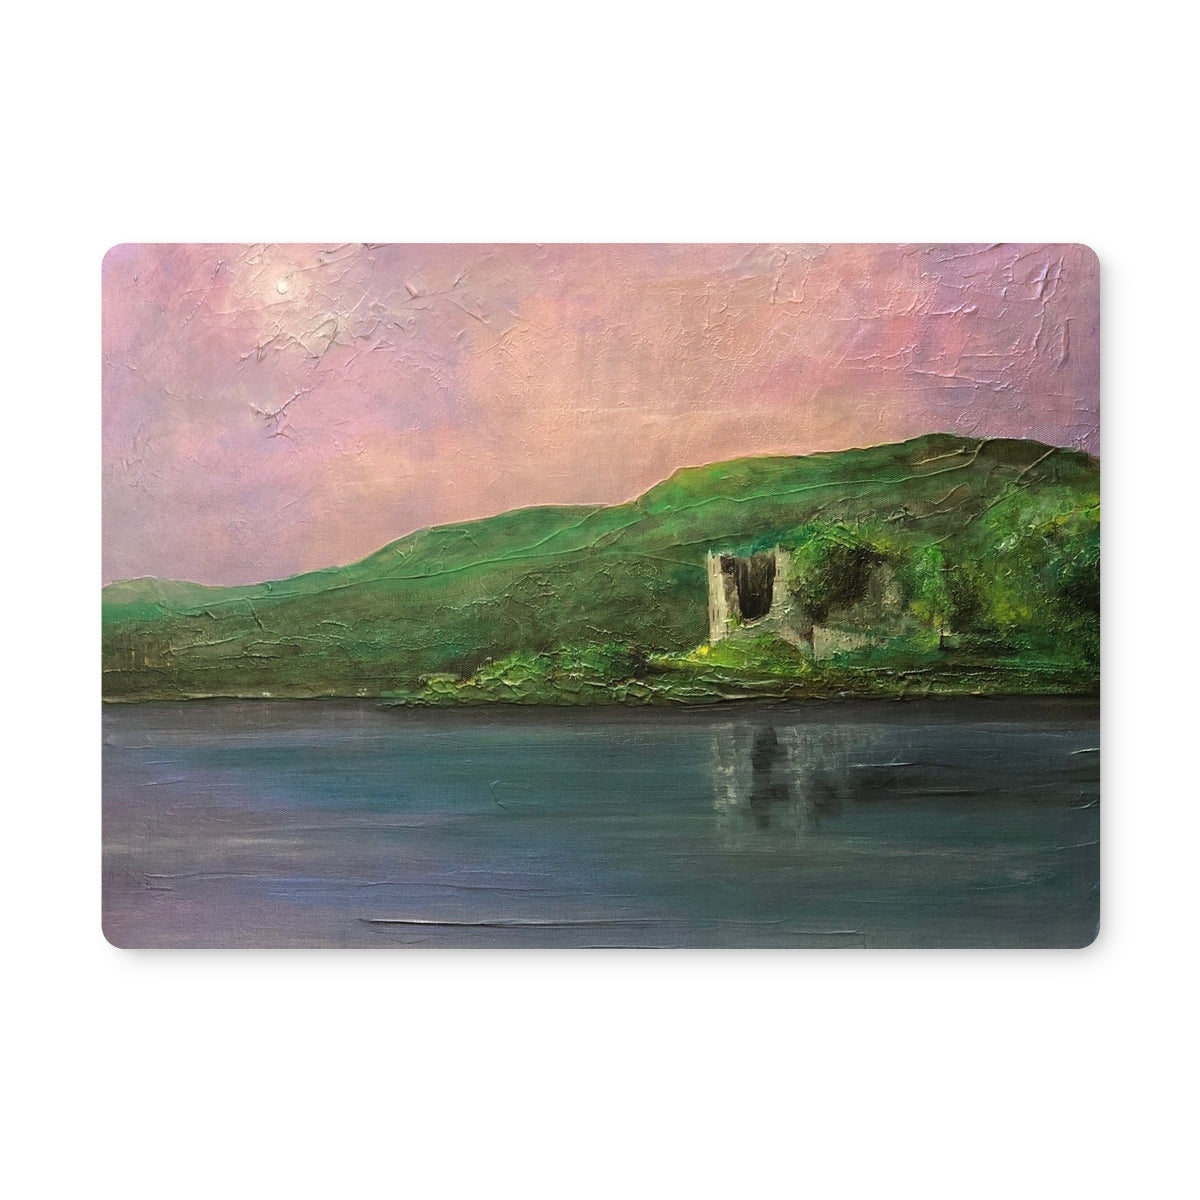 Old Castle Lachlan Art Gifts Placemat-Homeware-Prodigi-6 Placemats-Paintings, Prints, Homeware, Art Gifts From Scotland By Scottish Artist Kevin Hunter